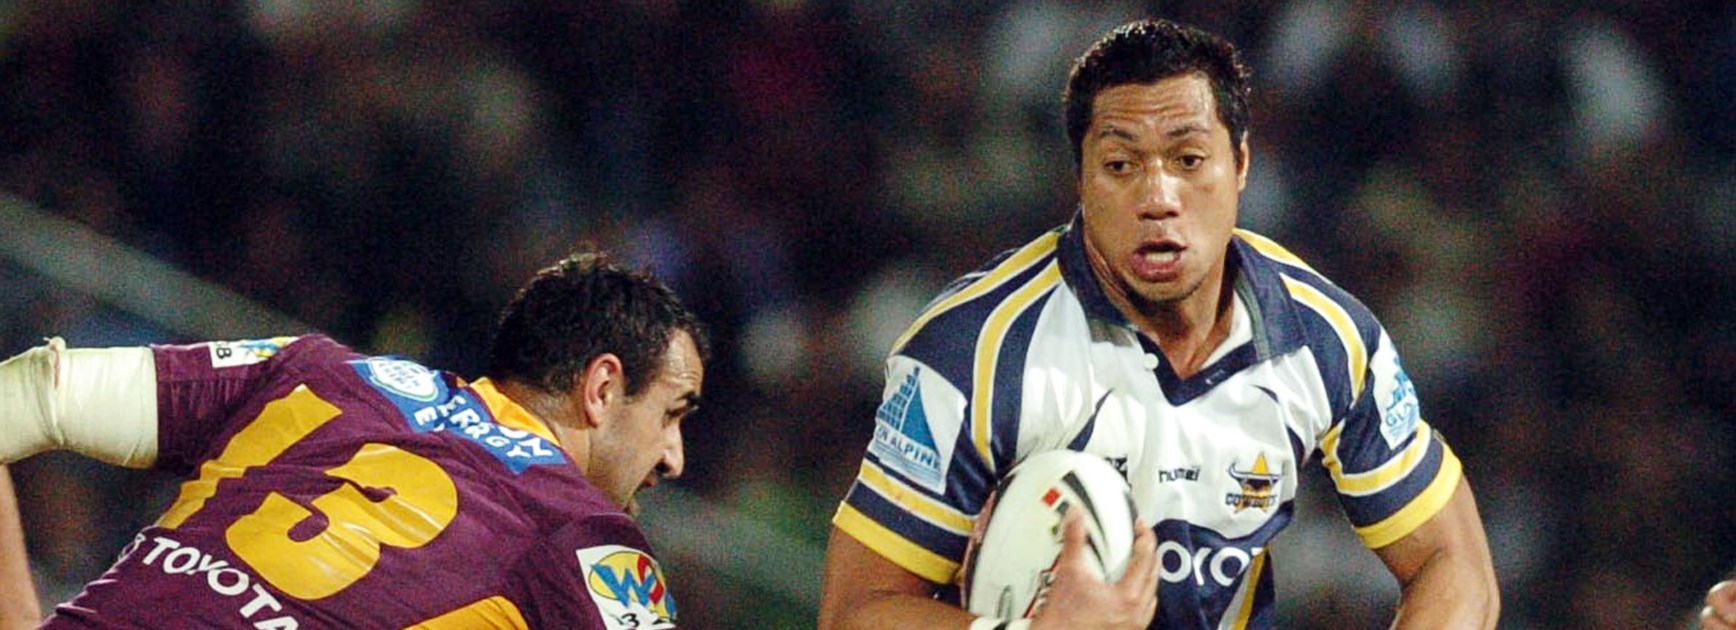 Sione Faumuina spent two years at the Cowboys but regrets not joining Wayne Bennett's Broncos.